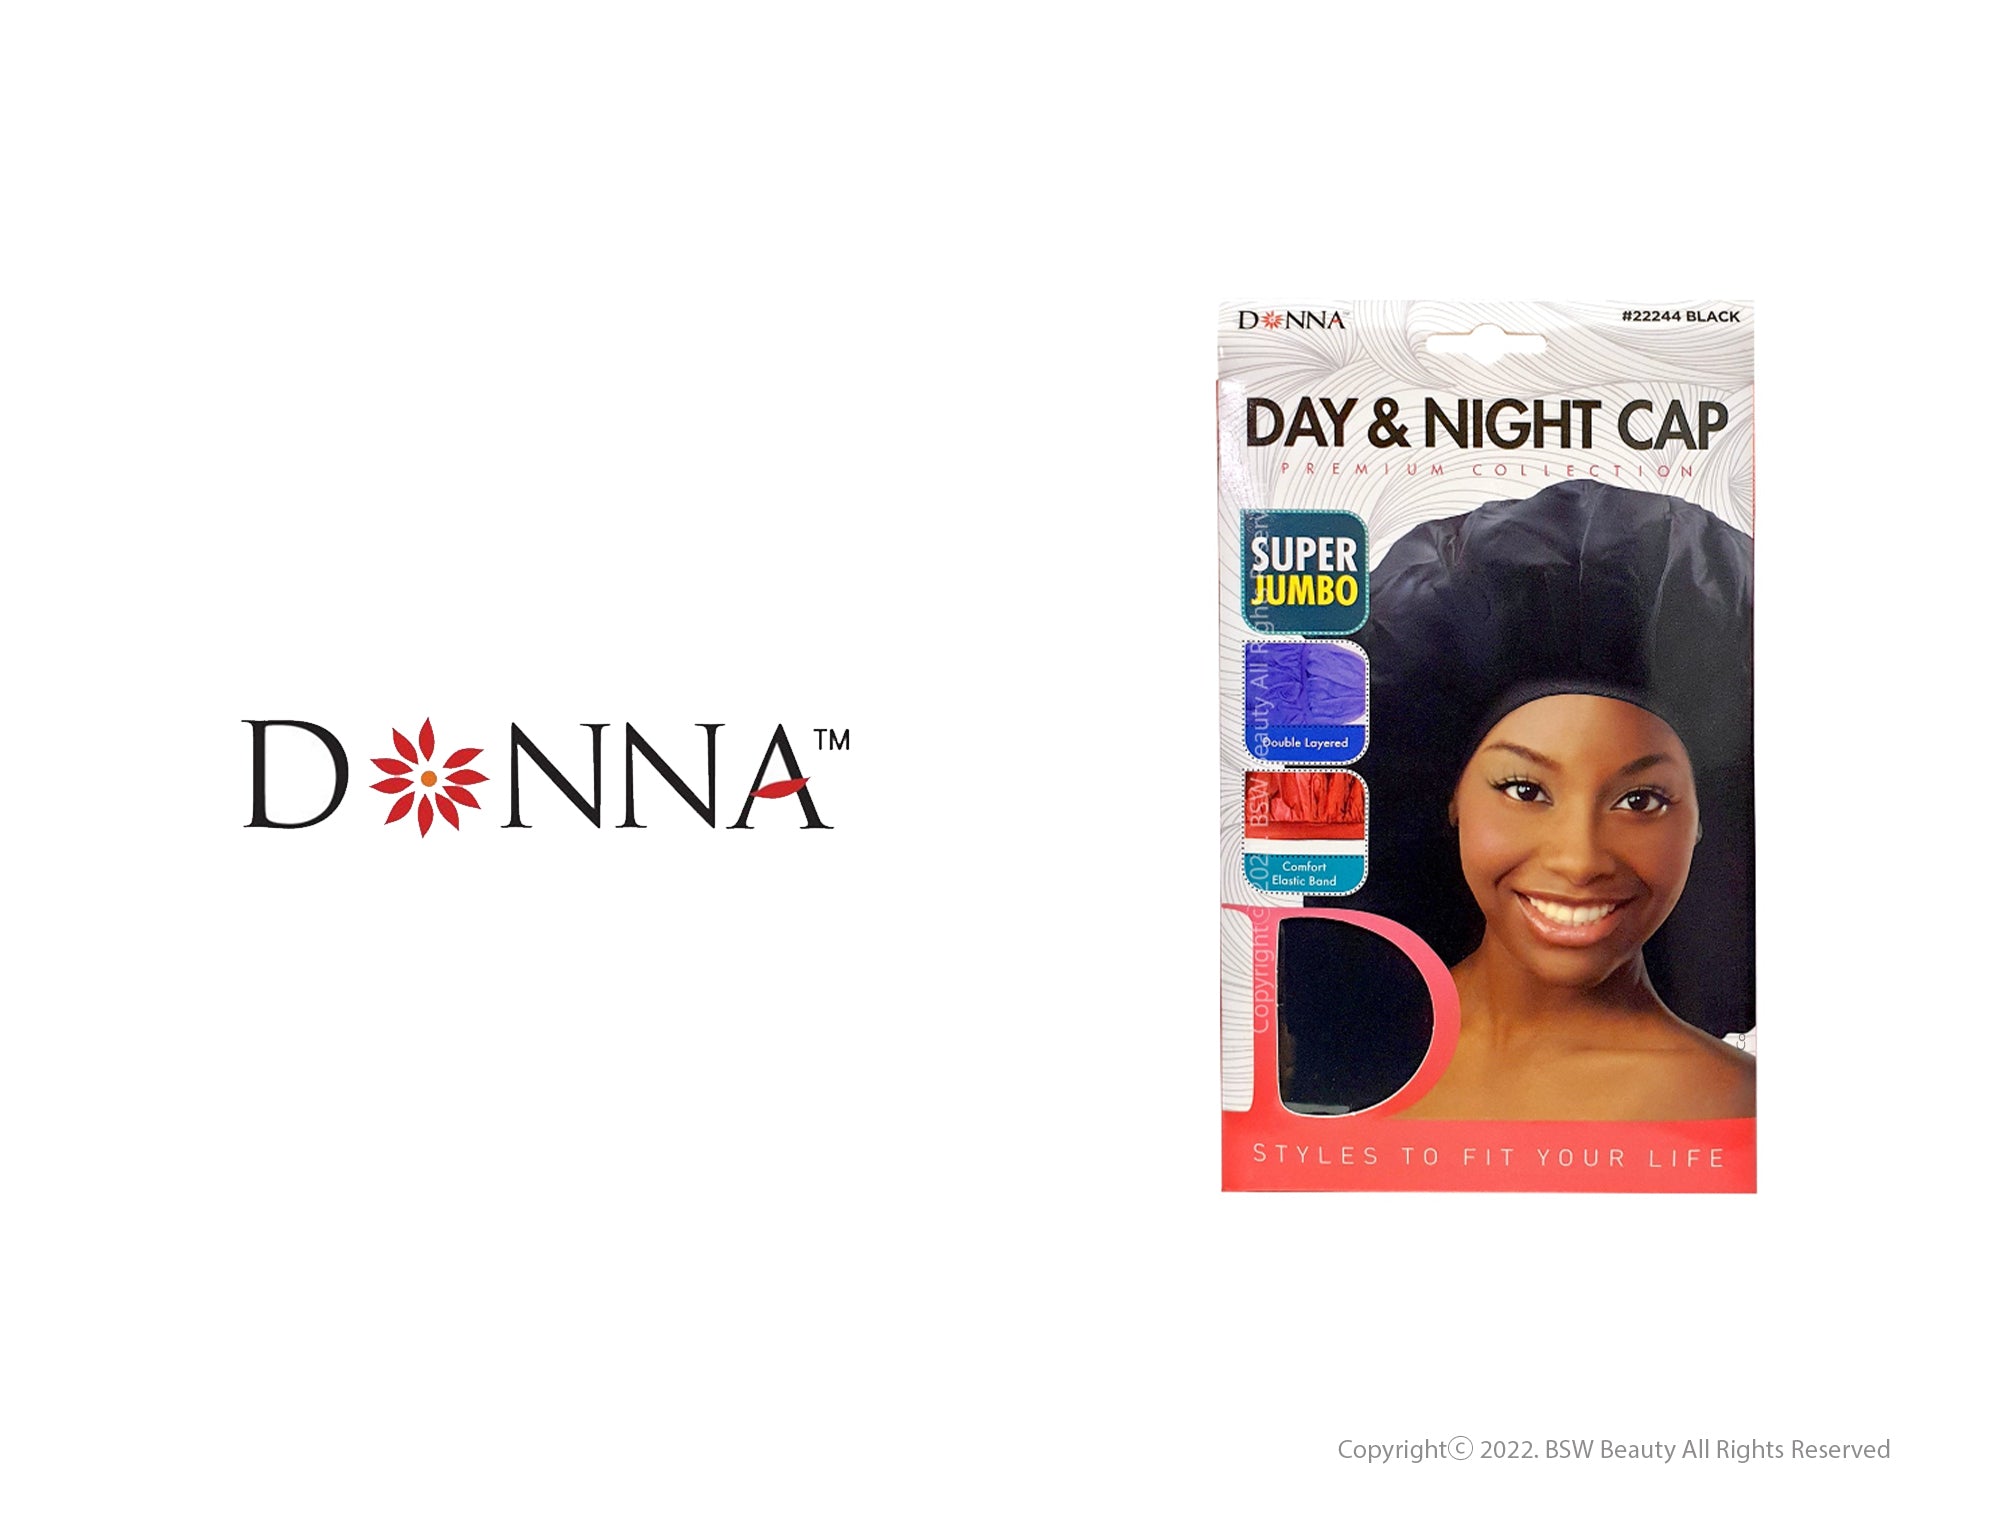 DONNA COLLECTION DELUXE WEAVING CAP - Carolyn's Beauty Supply